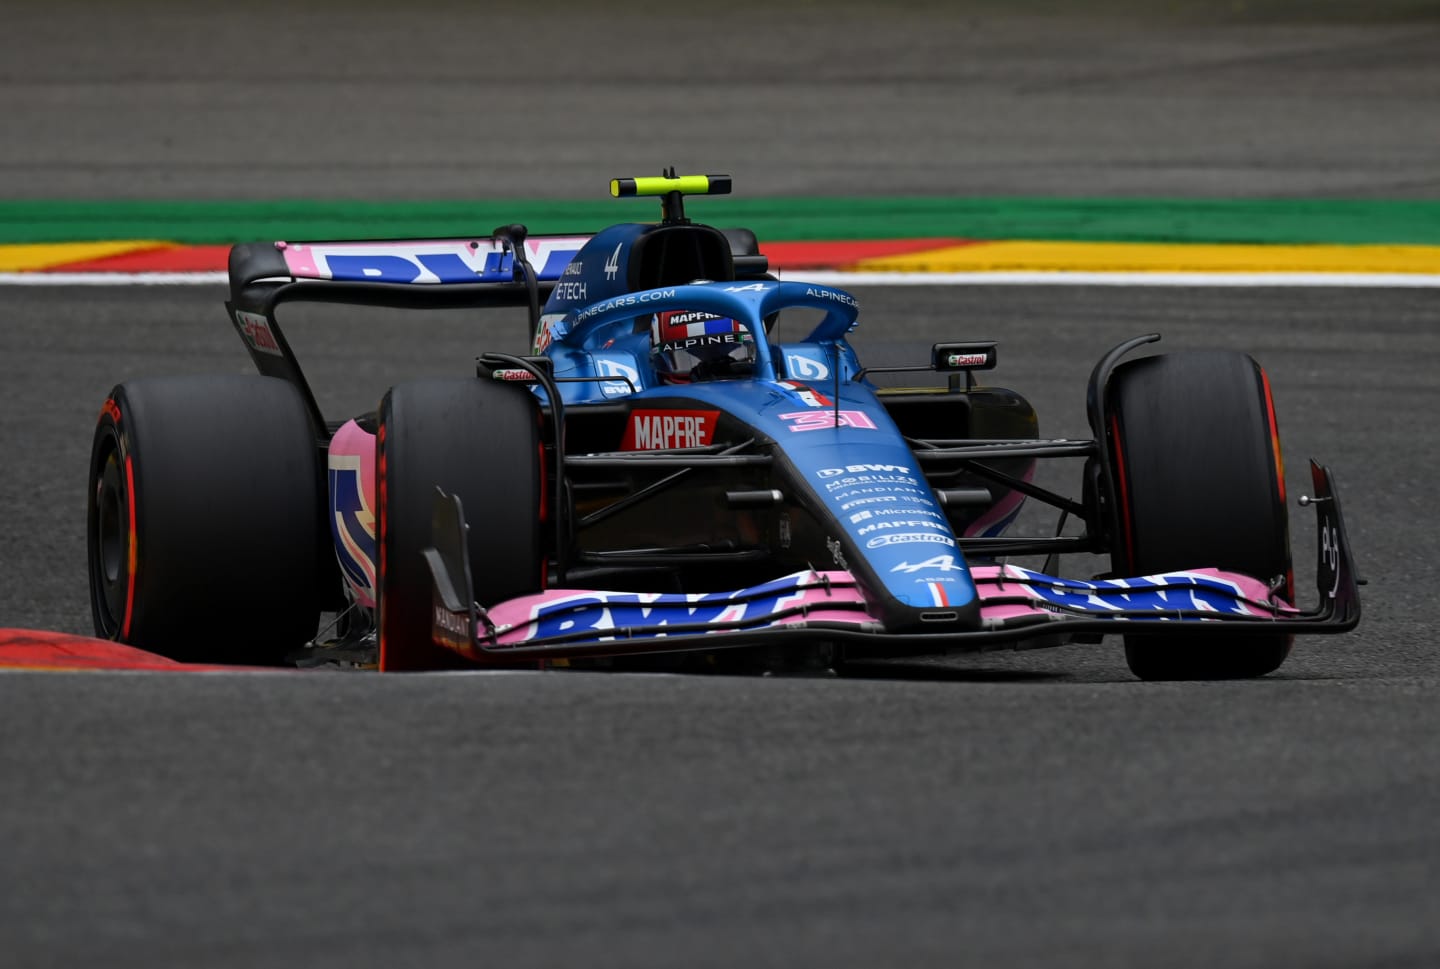 SPA, BELGIUM - AUGUST 27: Esteban Ocon of France driving the (31) Alpine F1 A522 Renault on track during final practice ahead of the F1 Grand Prix of Belgium at Circuit de Spa-Francorchamps on August 27, 2022 in Spa, Belgium. (Photo by Dan Mullan/Getty Images)